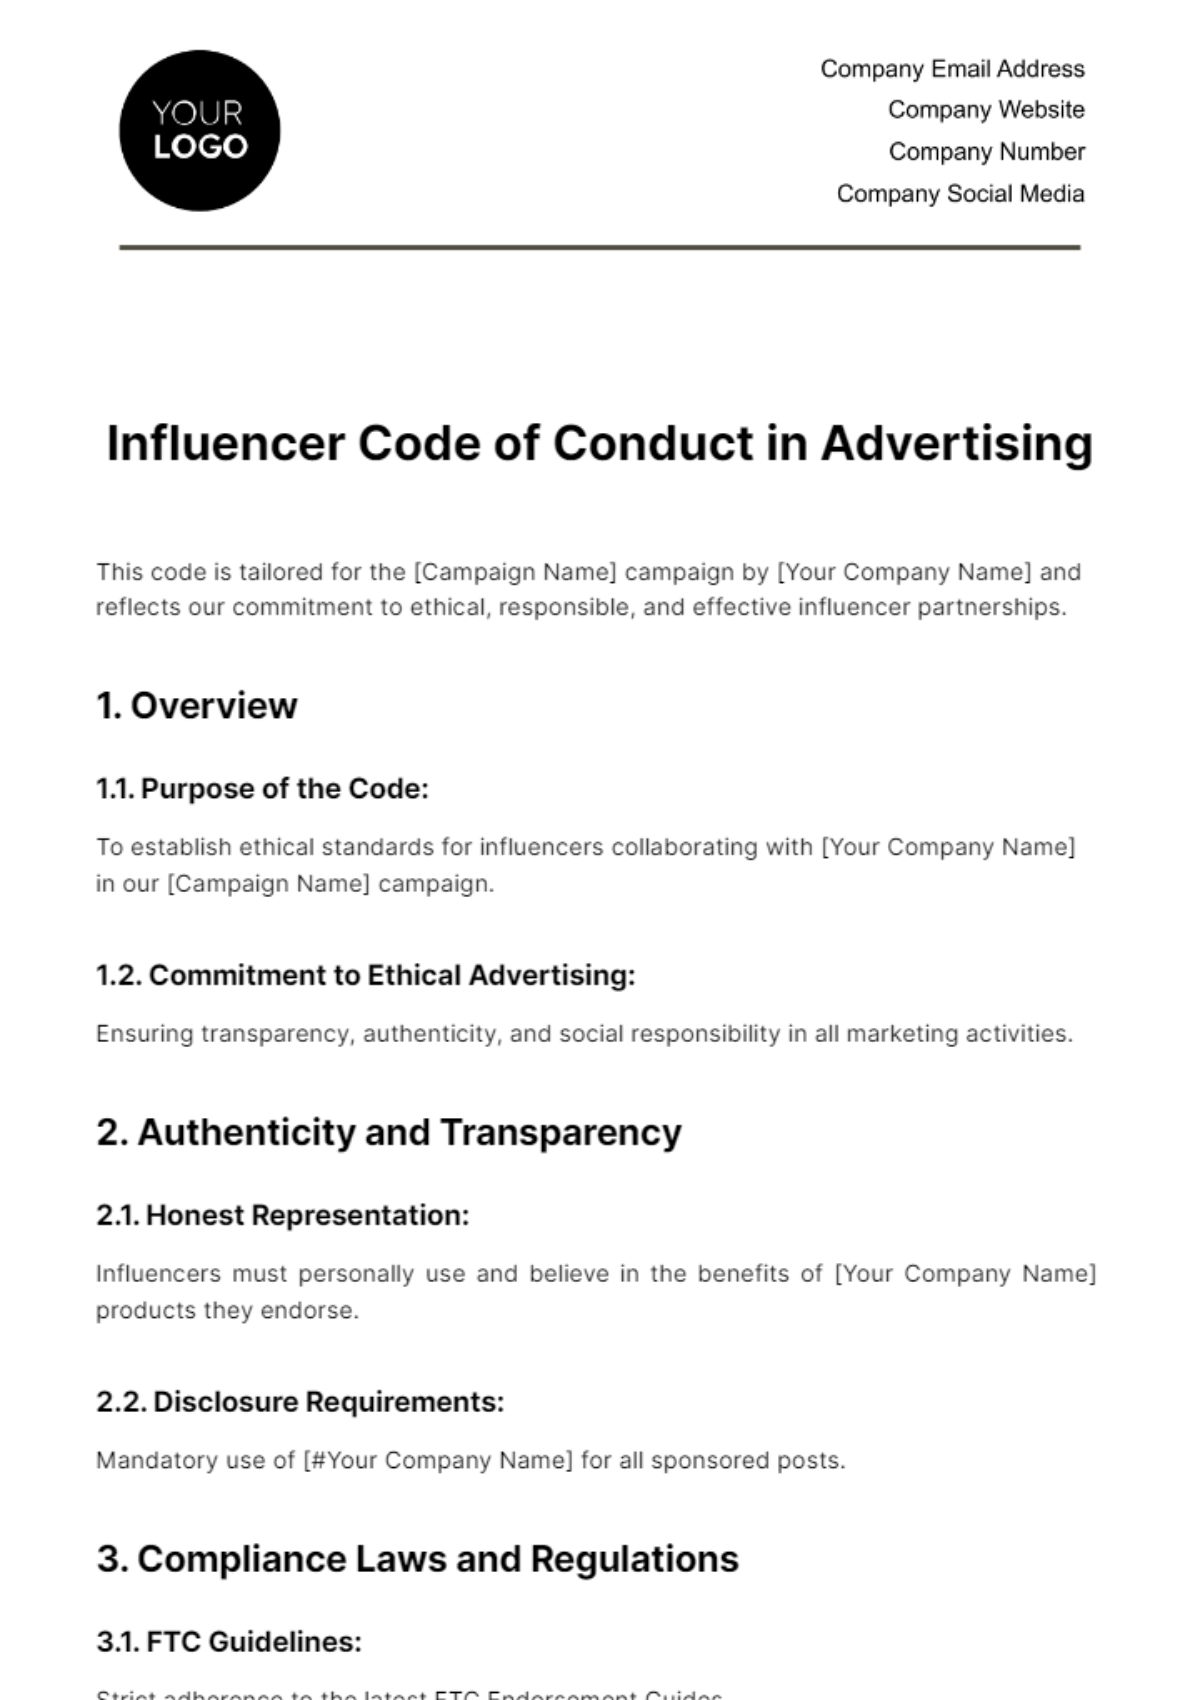 Influencer Code of Conduct in Advertising Template